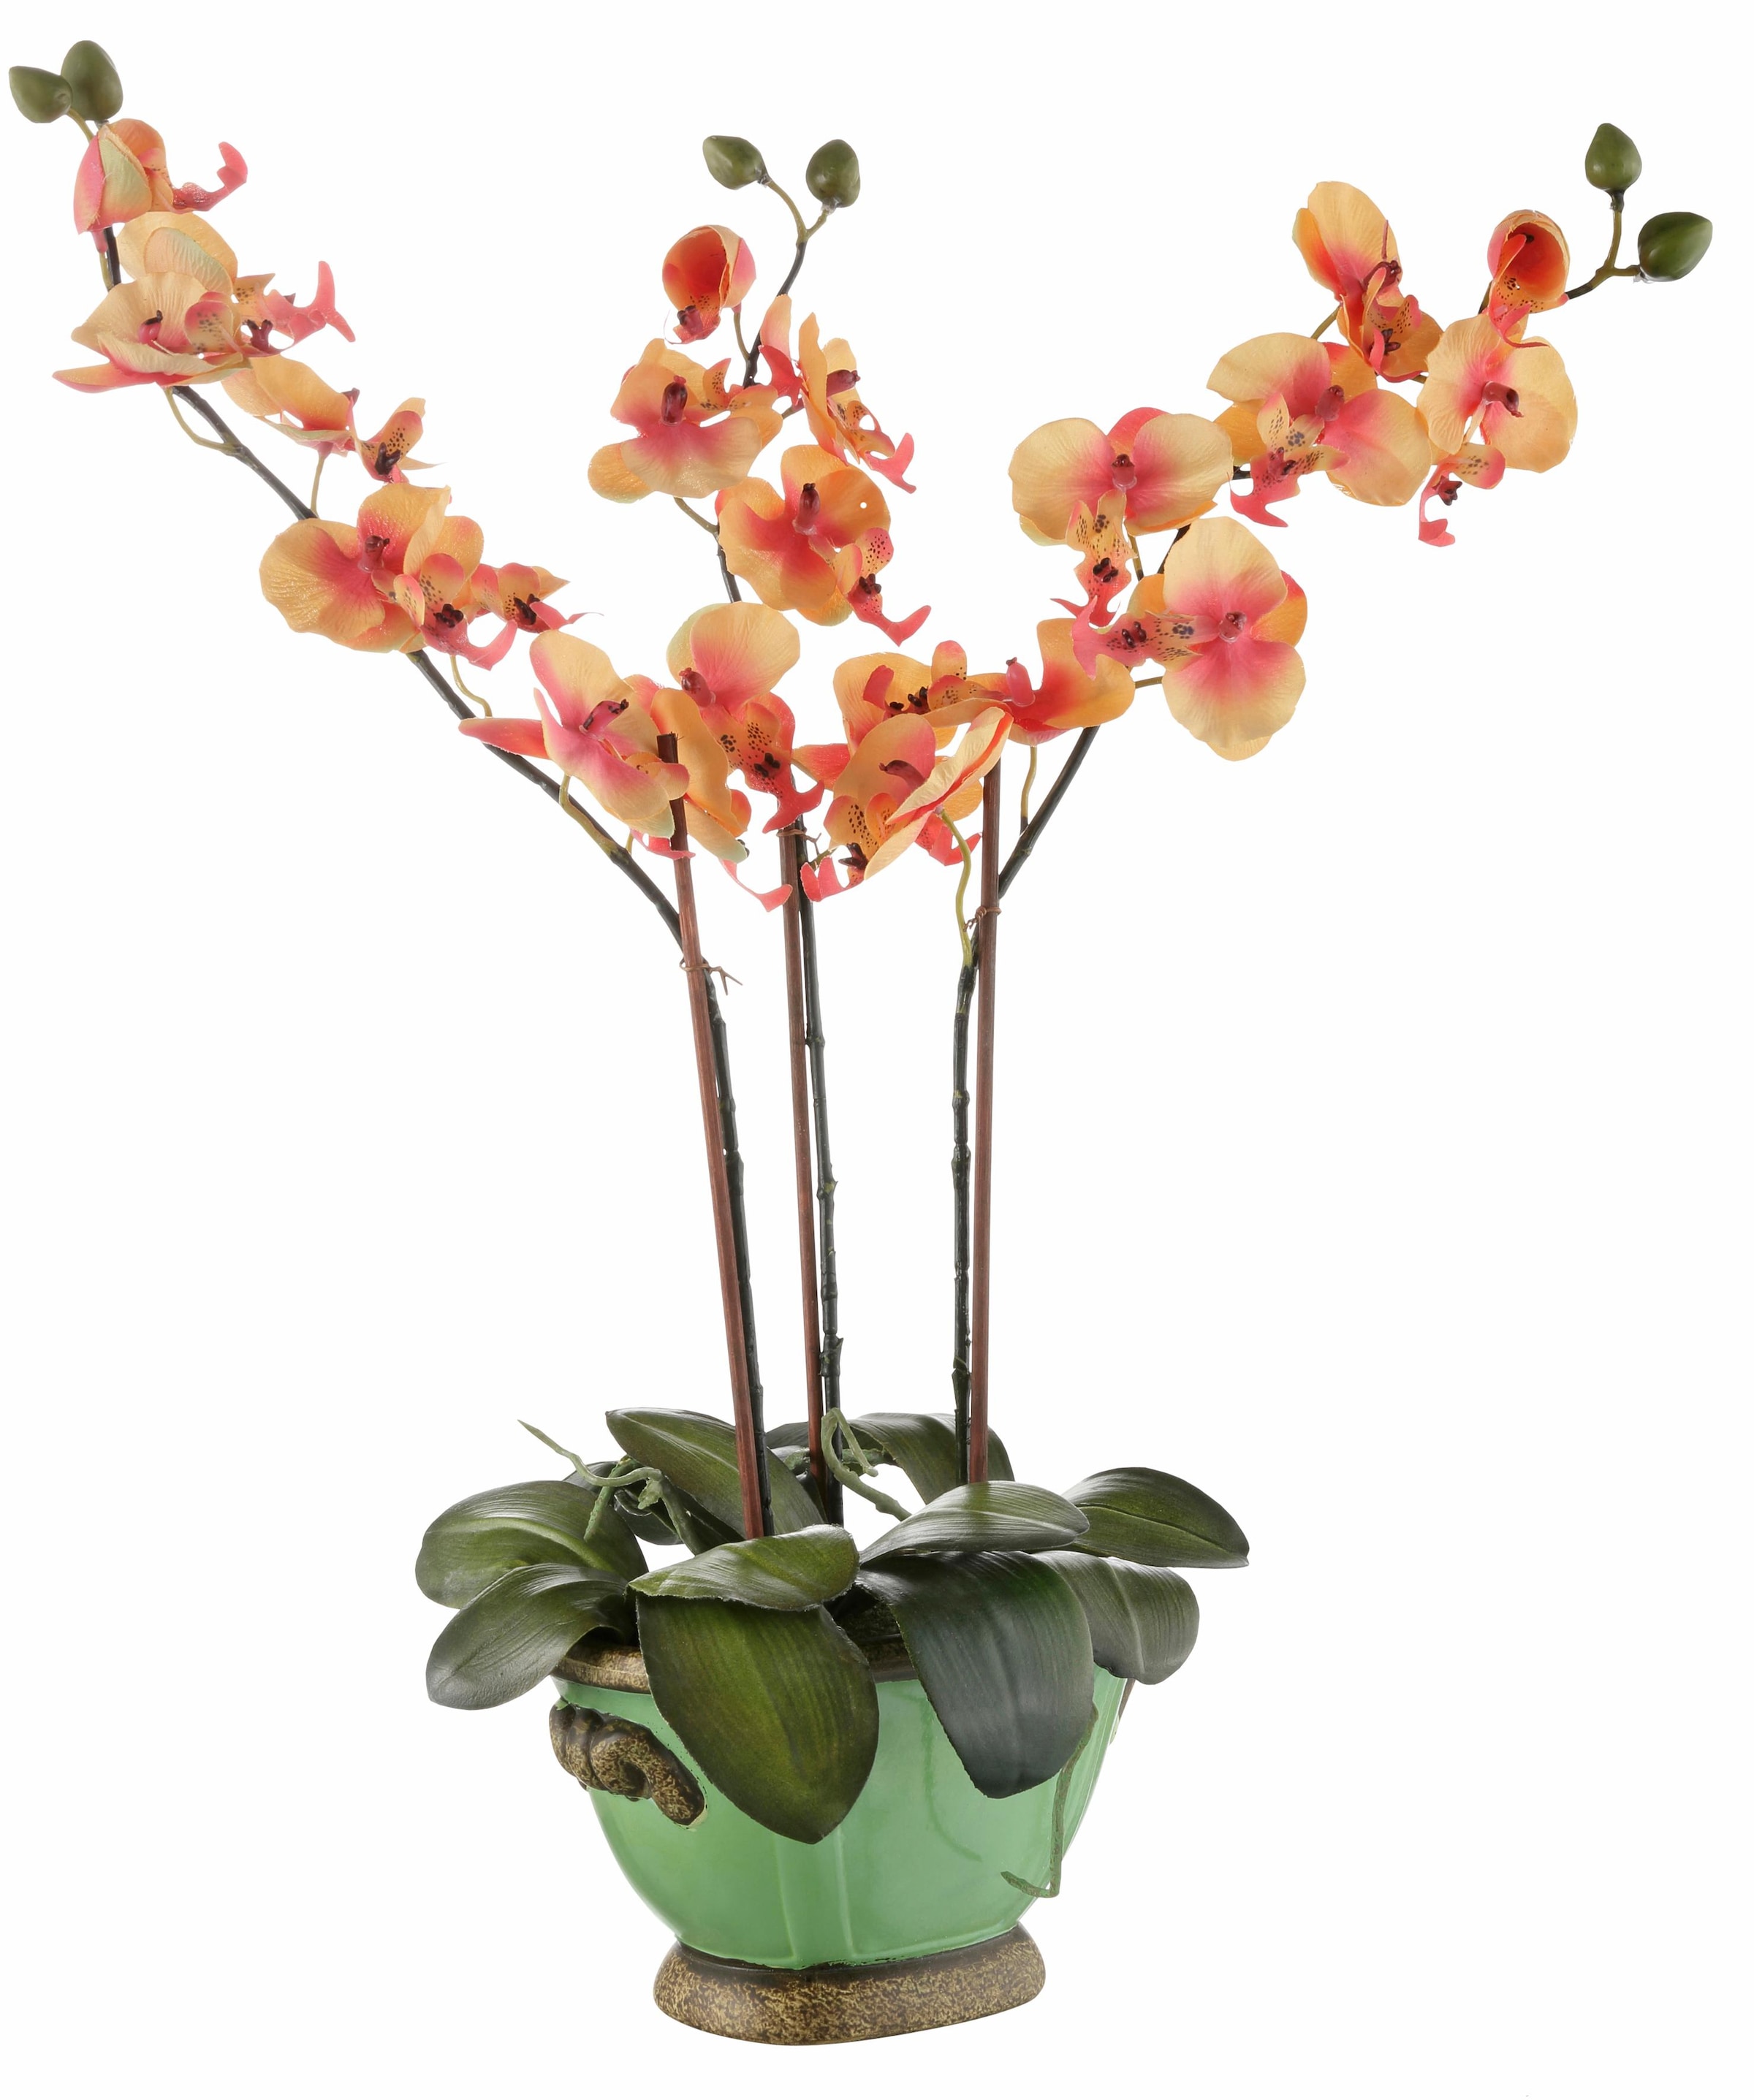 Kunstpflanze I.GE.A. »Orchidee« acheter confortablement